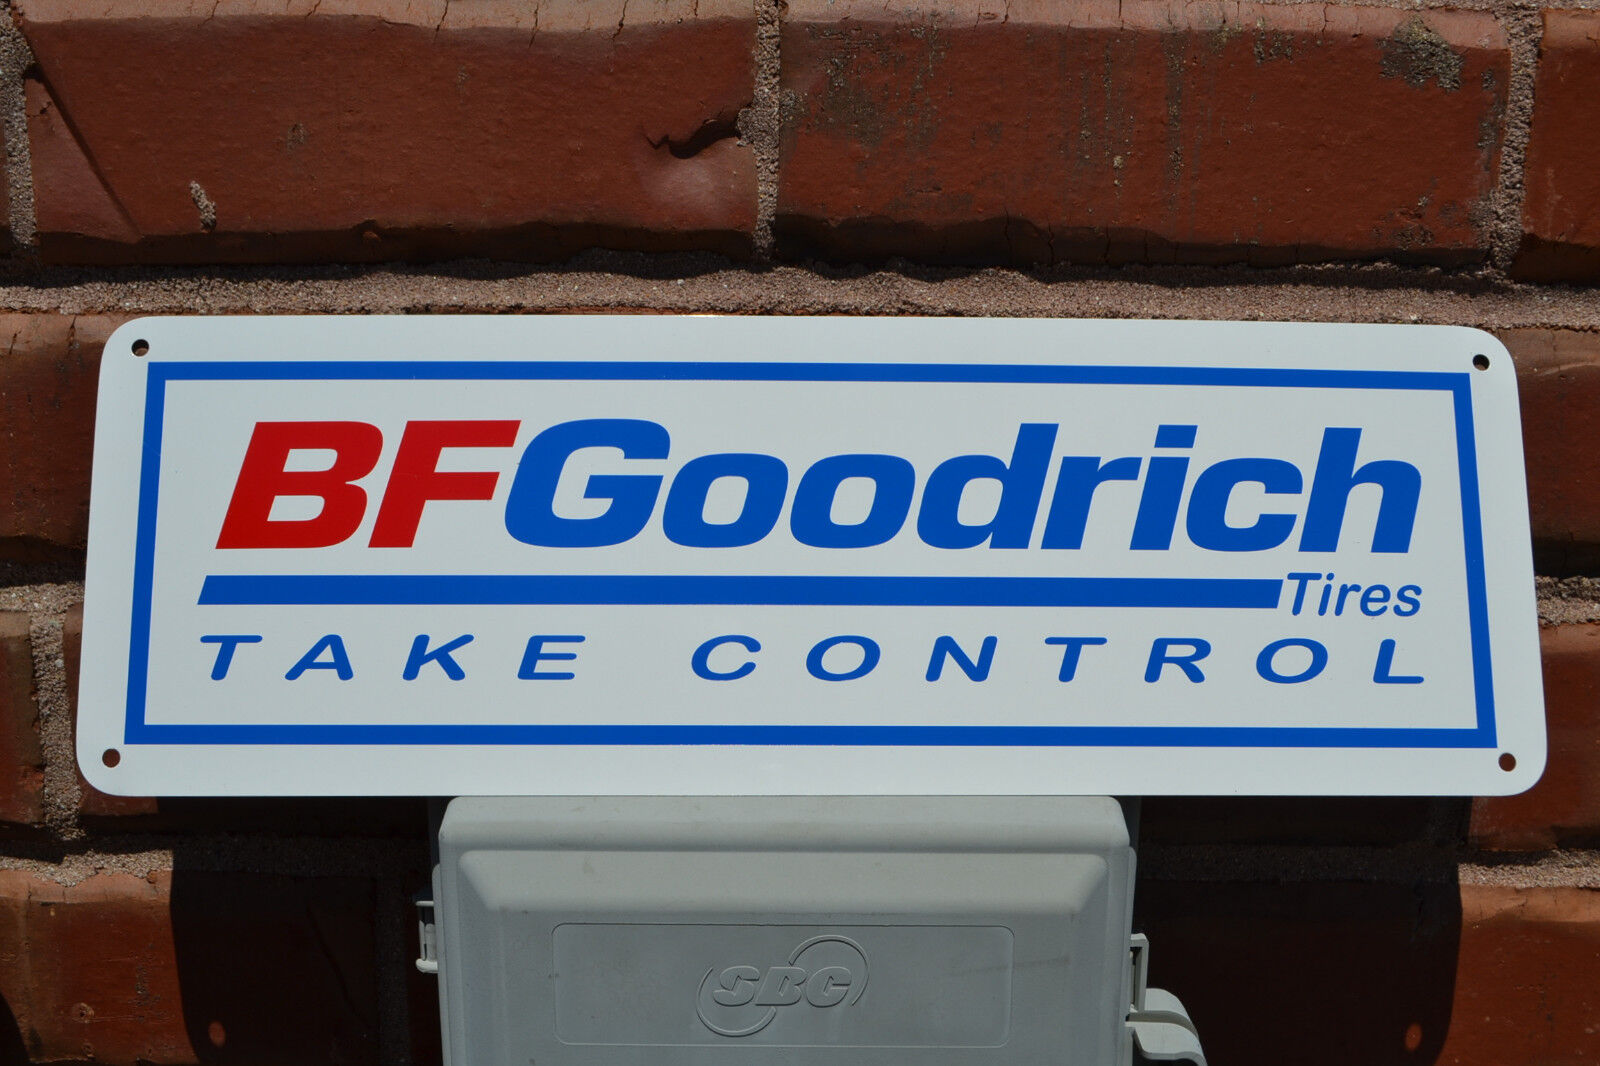 BF GOODRICH Tires SIGN Take Control Racing Tire Shop Advertising Logo SIGN